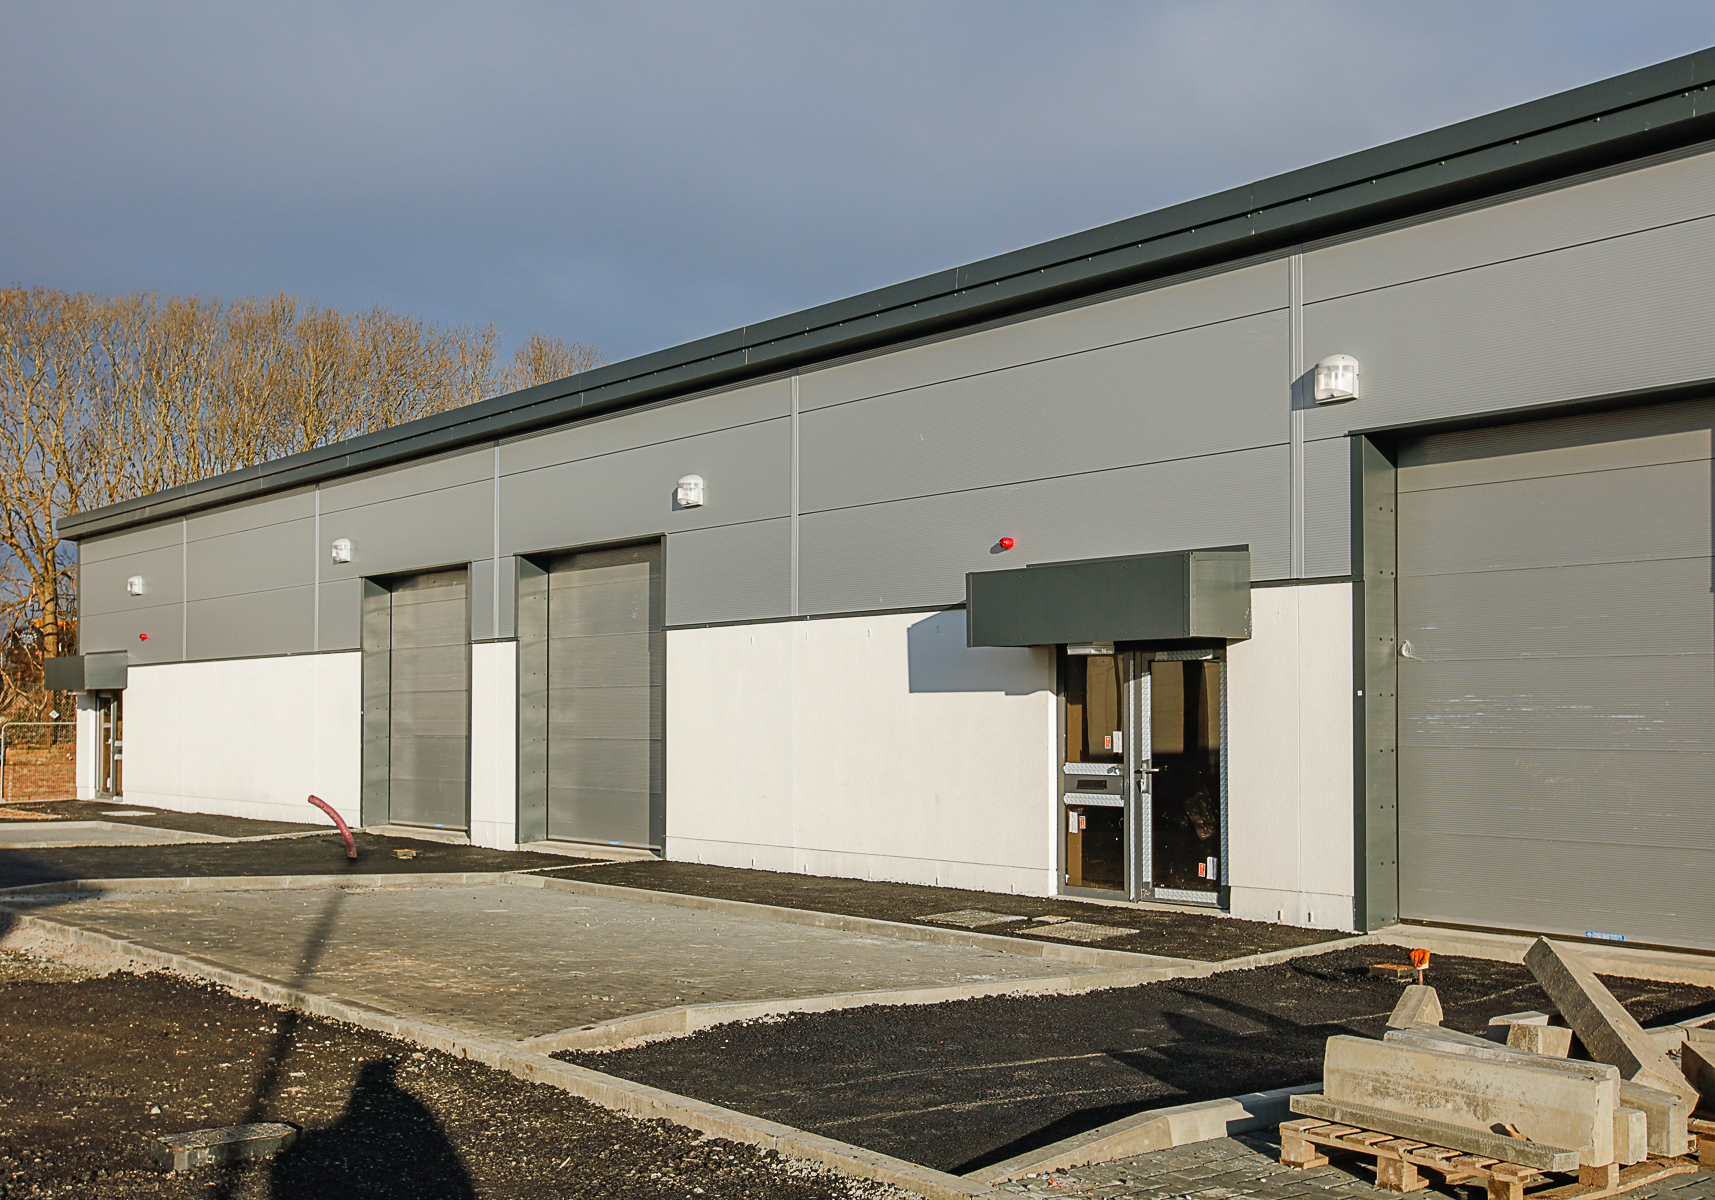 Glenrothes industrial units completed as Fife City Region Deal programme approved